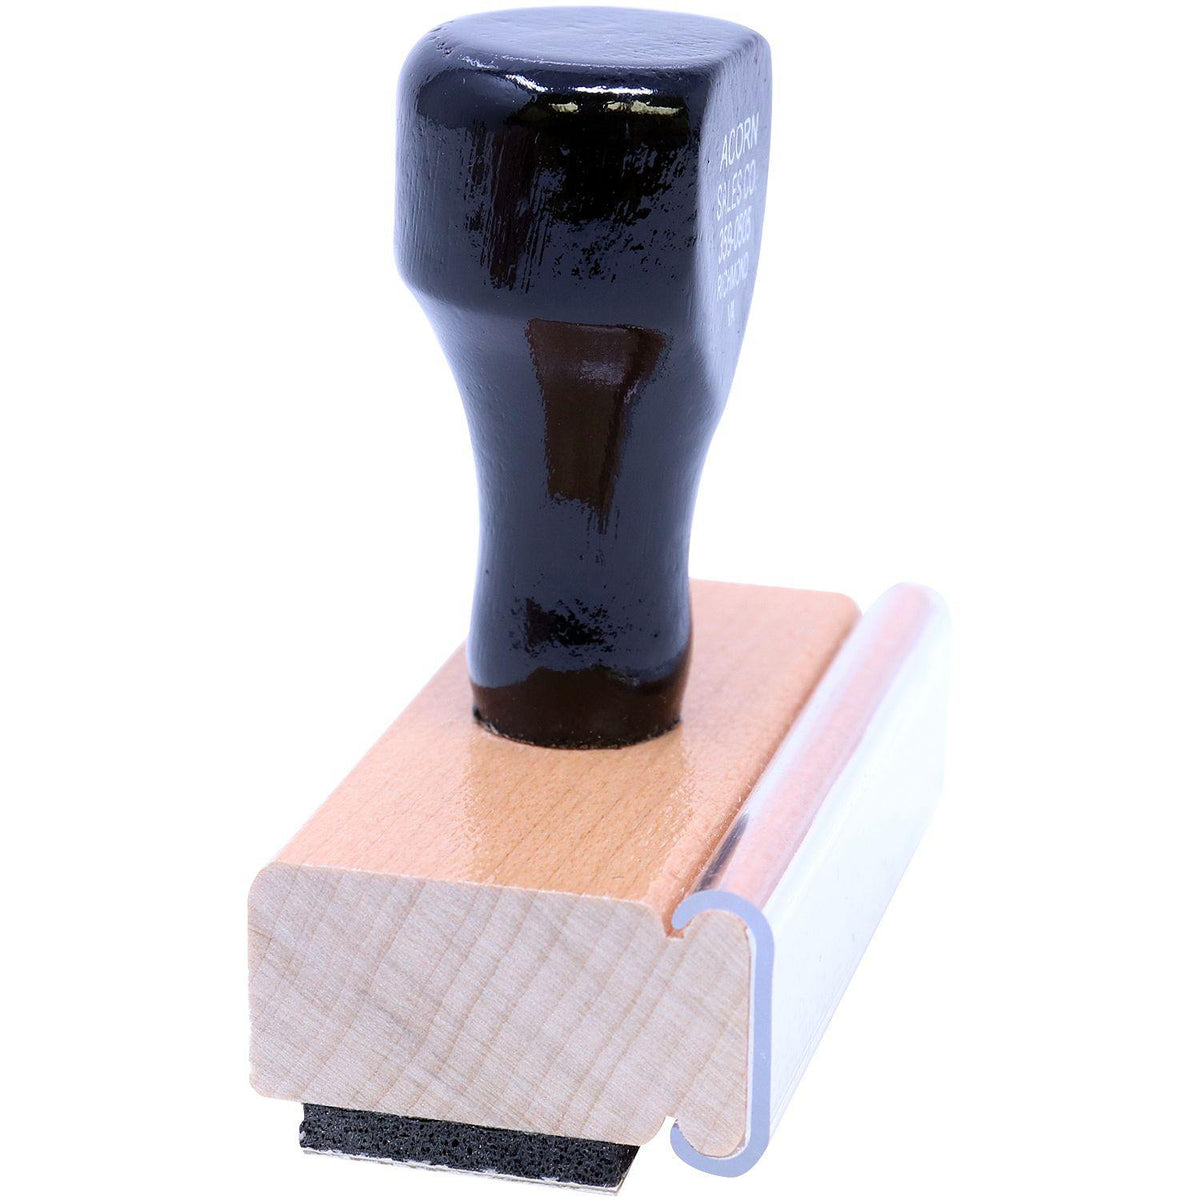 Side View of Large Expreso Rubber Stamp at an Angle